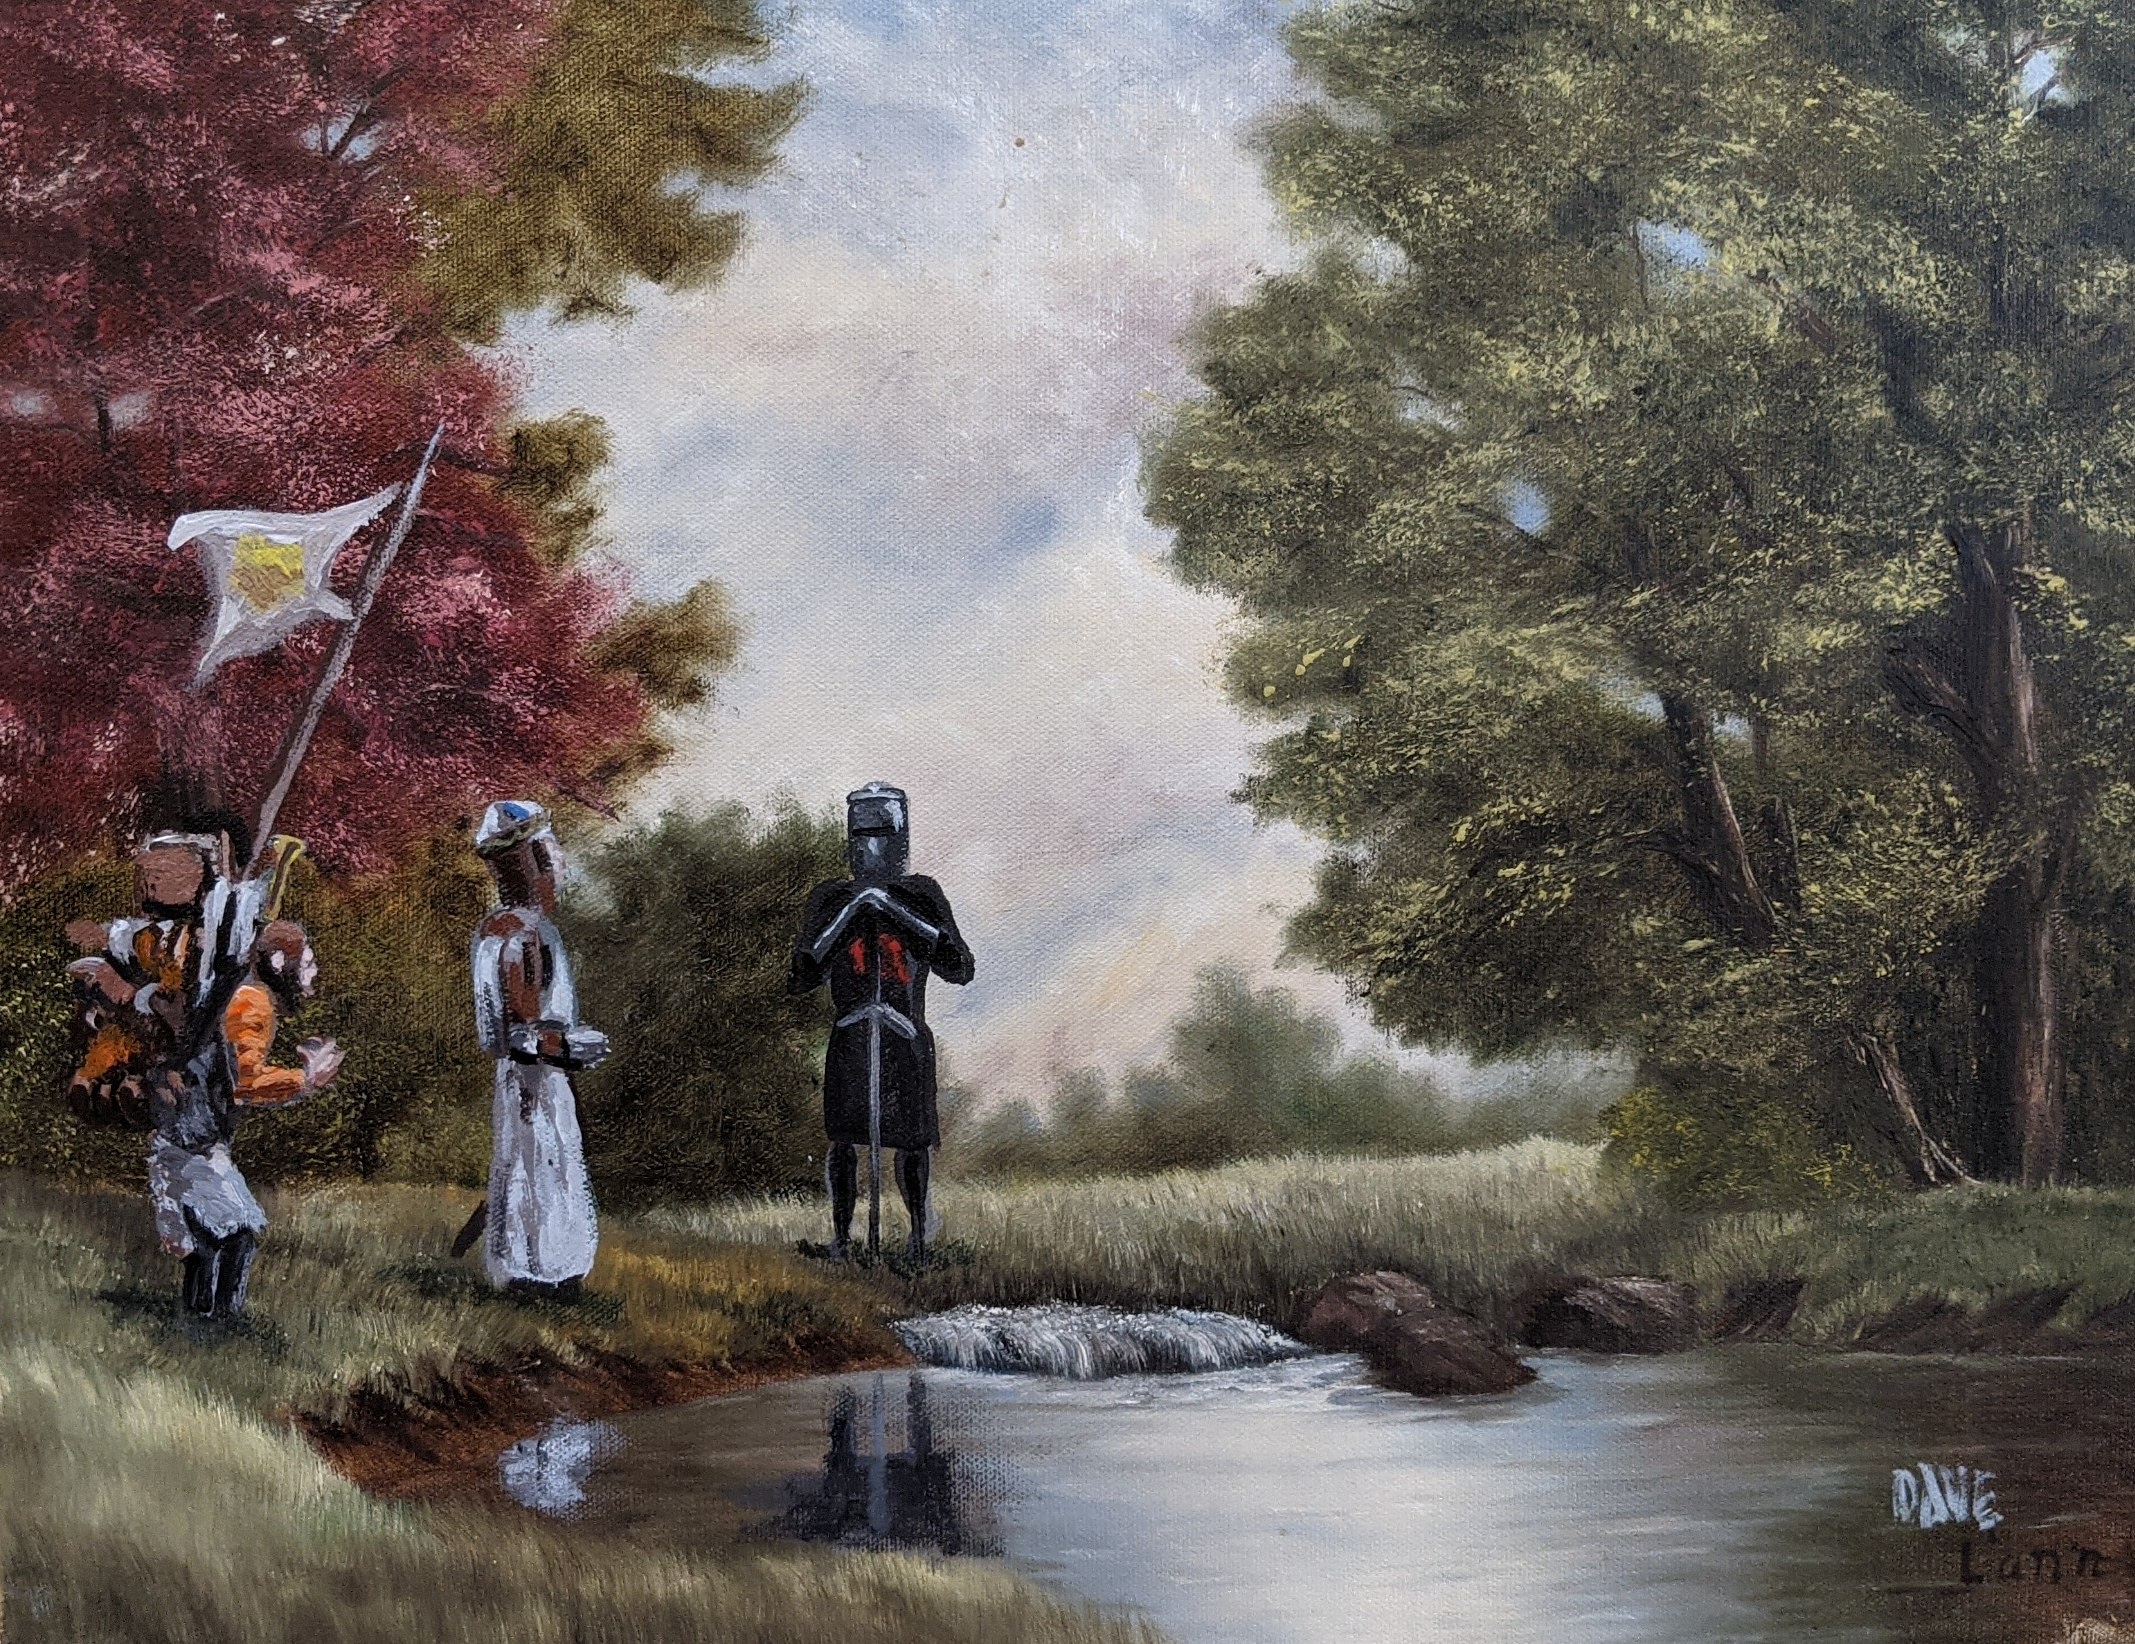 a landscape painting of a clearing in a forest with a lake. three characters from "monty python and the holy grail" have been added and are standing near the water.